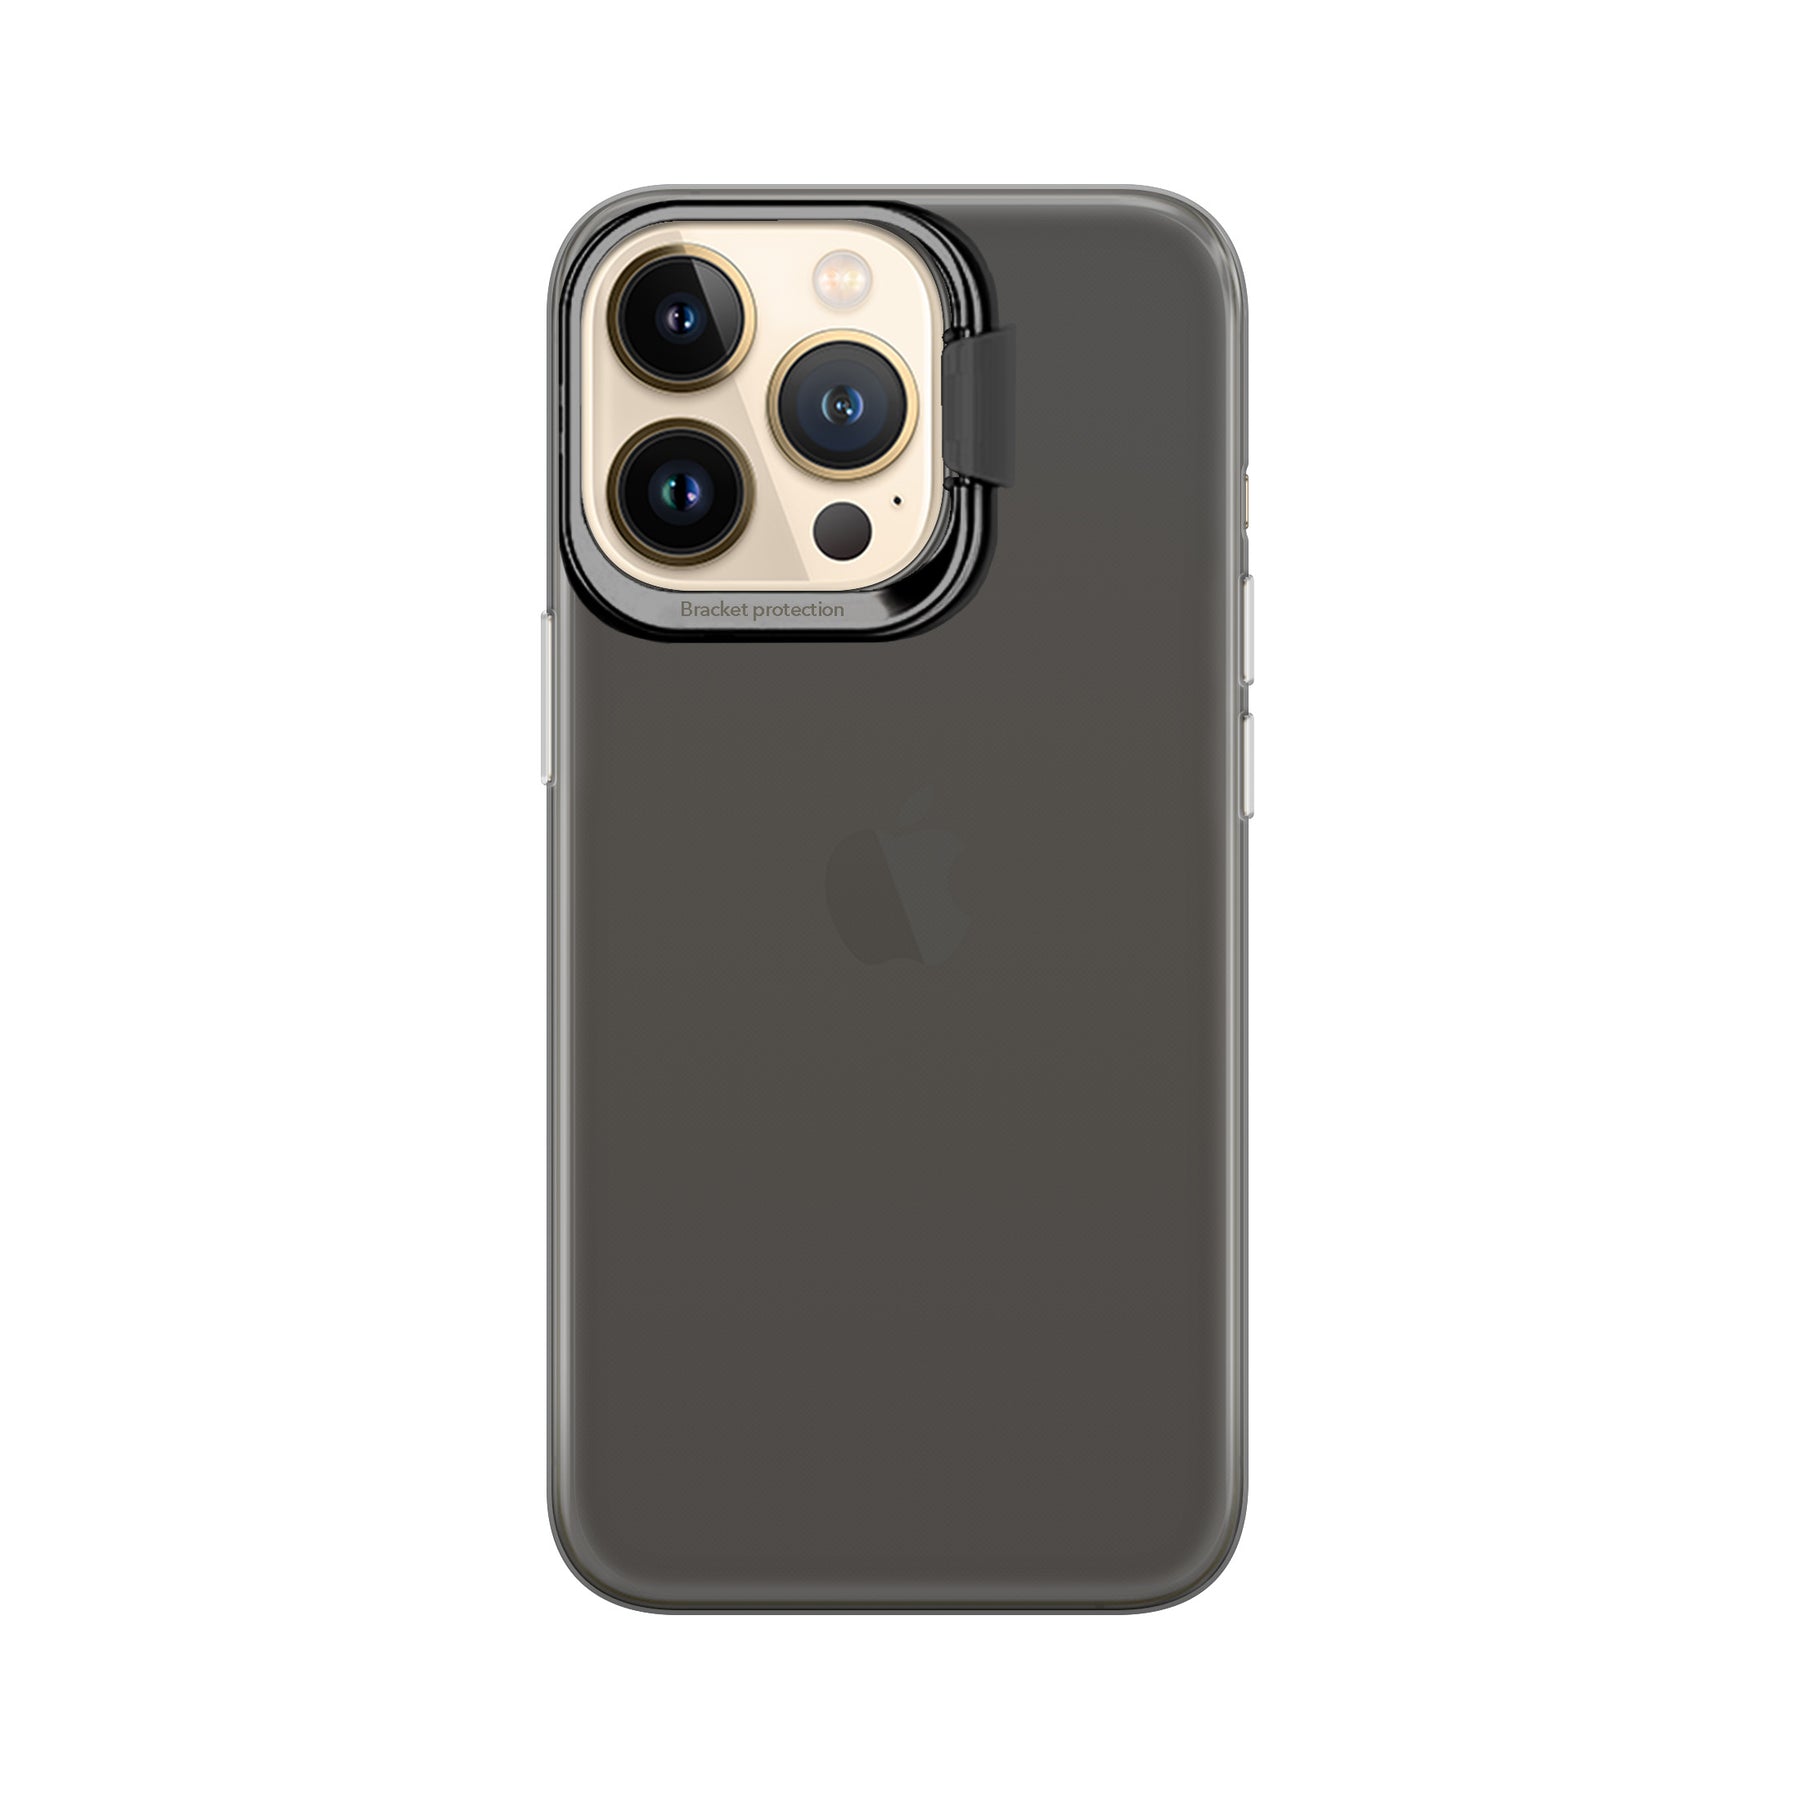 Shop your next iPhone 12 Pro Mac case and 13 case with ManMade Cycle today. We offer premium lifeproof phone cases in Australia with 2 years warranty. Buy your phone case or trade in your used microsoft with us today.